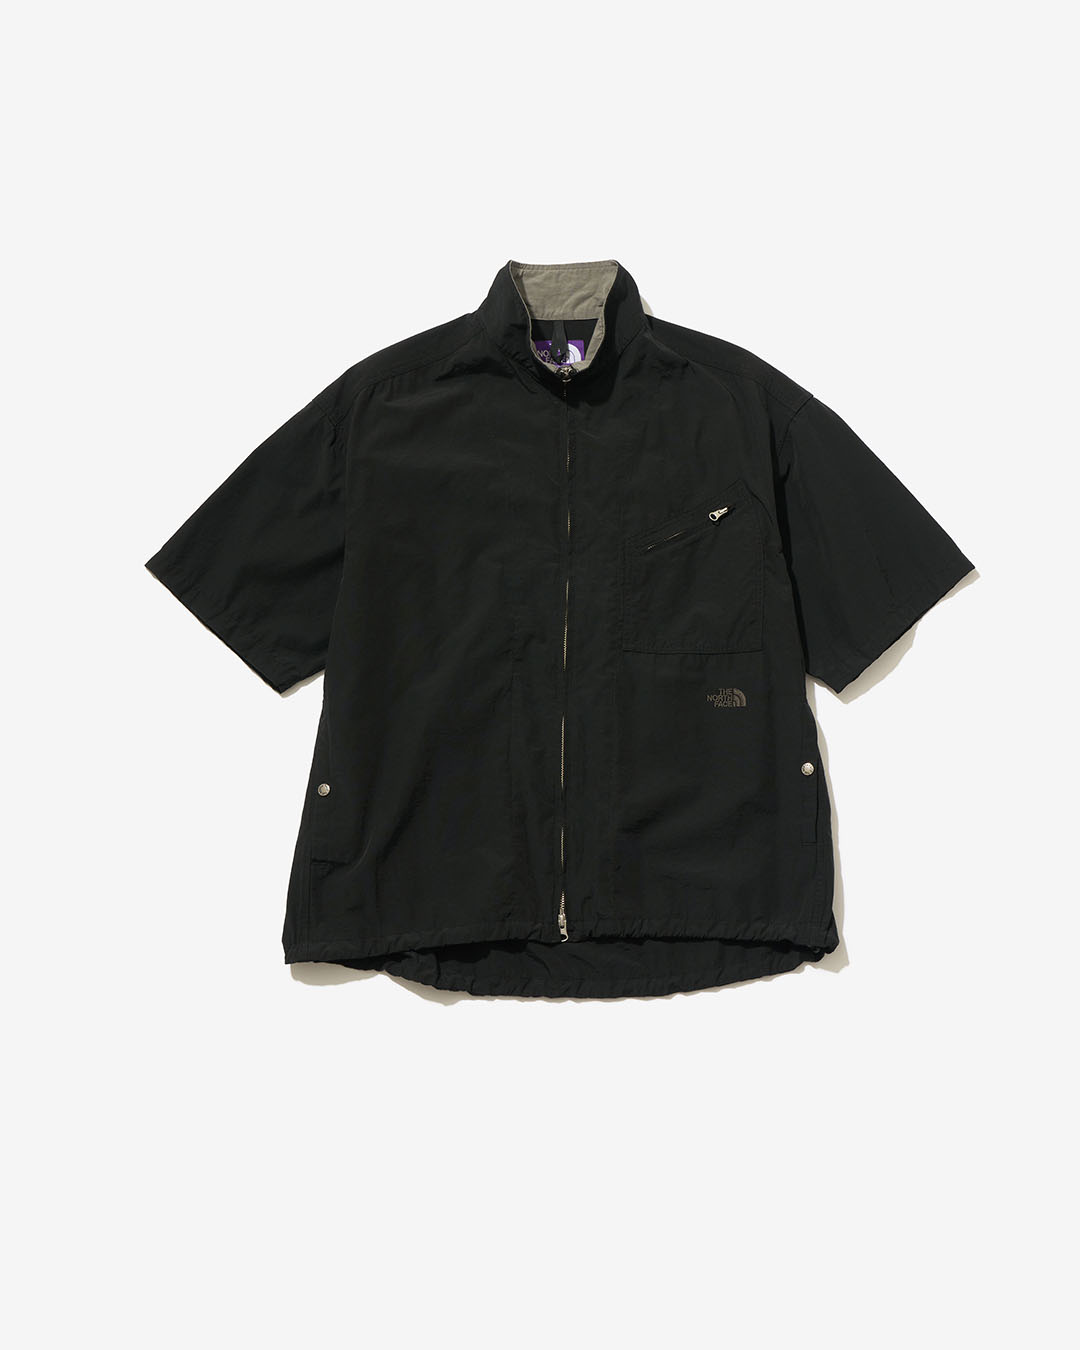 nanamica / THE NORTH FACE PURPLE LABEL / Featured Product 